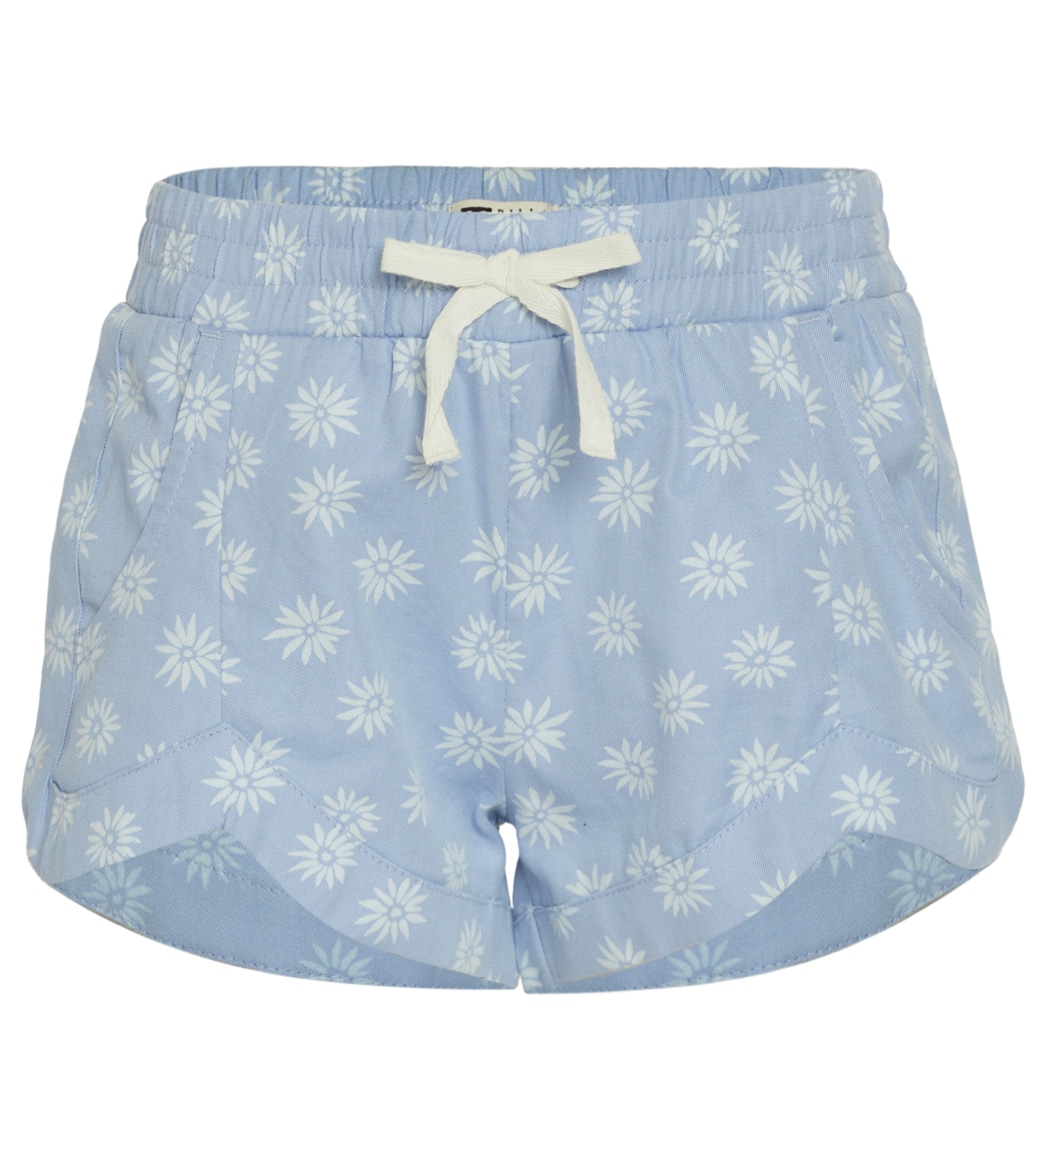 Billabong Girls' Mad For You Shorts - Sweet Blue Large/12 Cotton - Swimoutlet.com